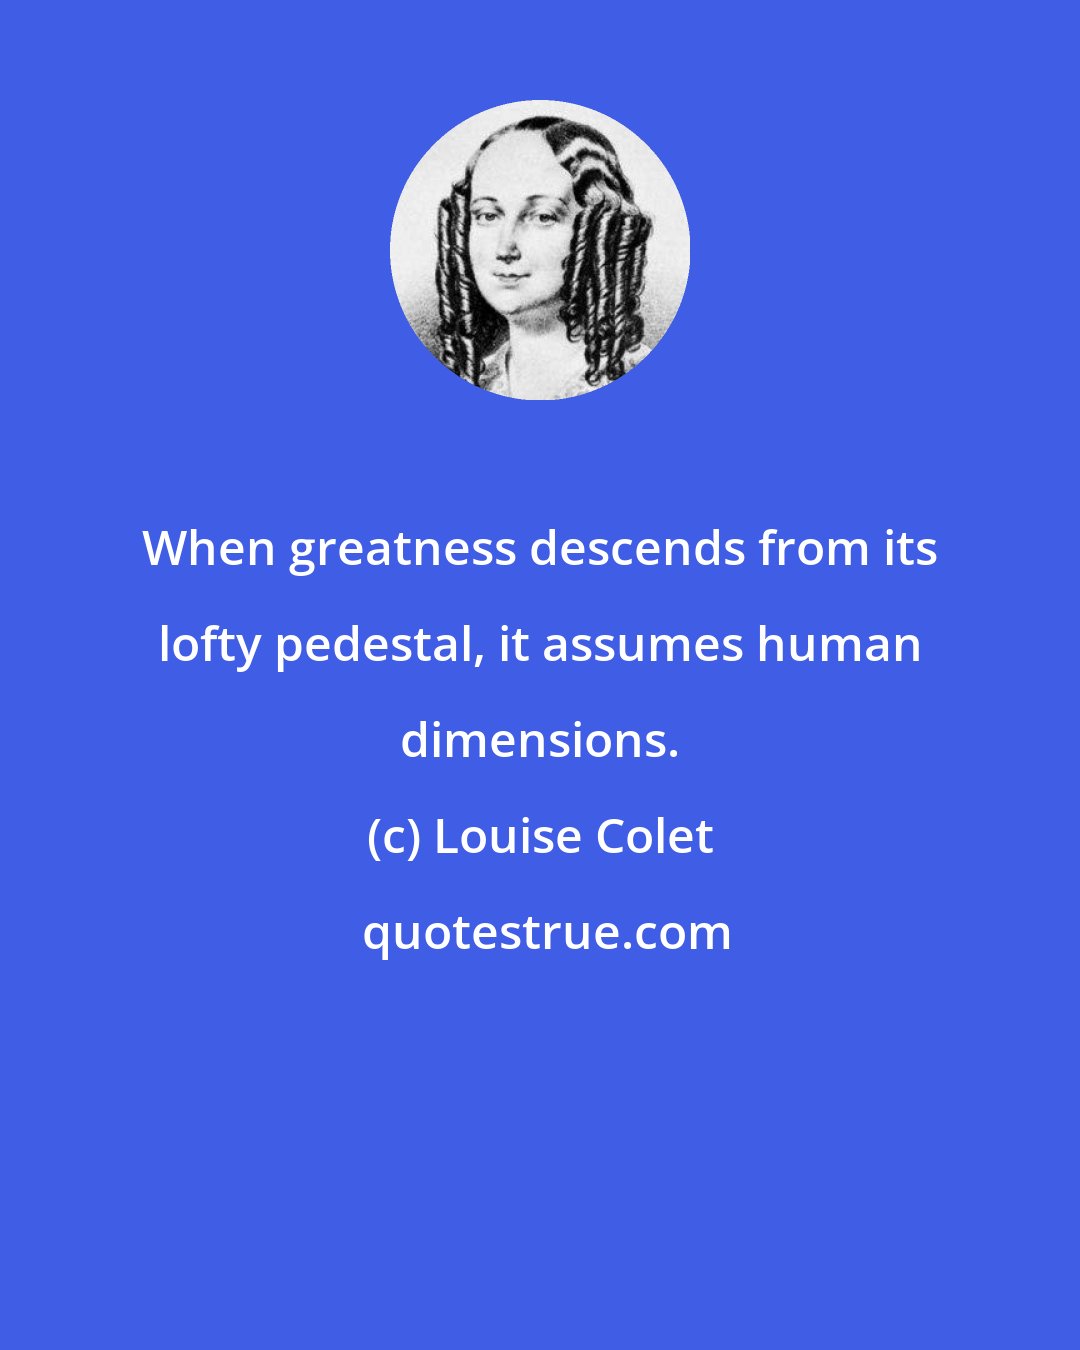 Louise Colet: When greatness descends from its lofty pedestal, it assumes human dimensions.